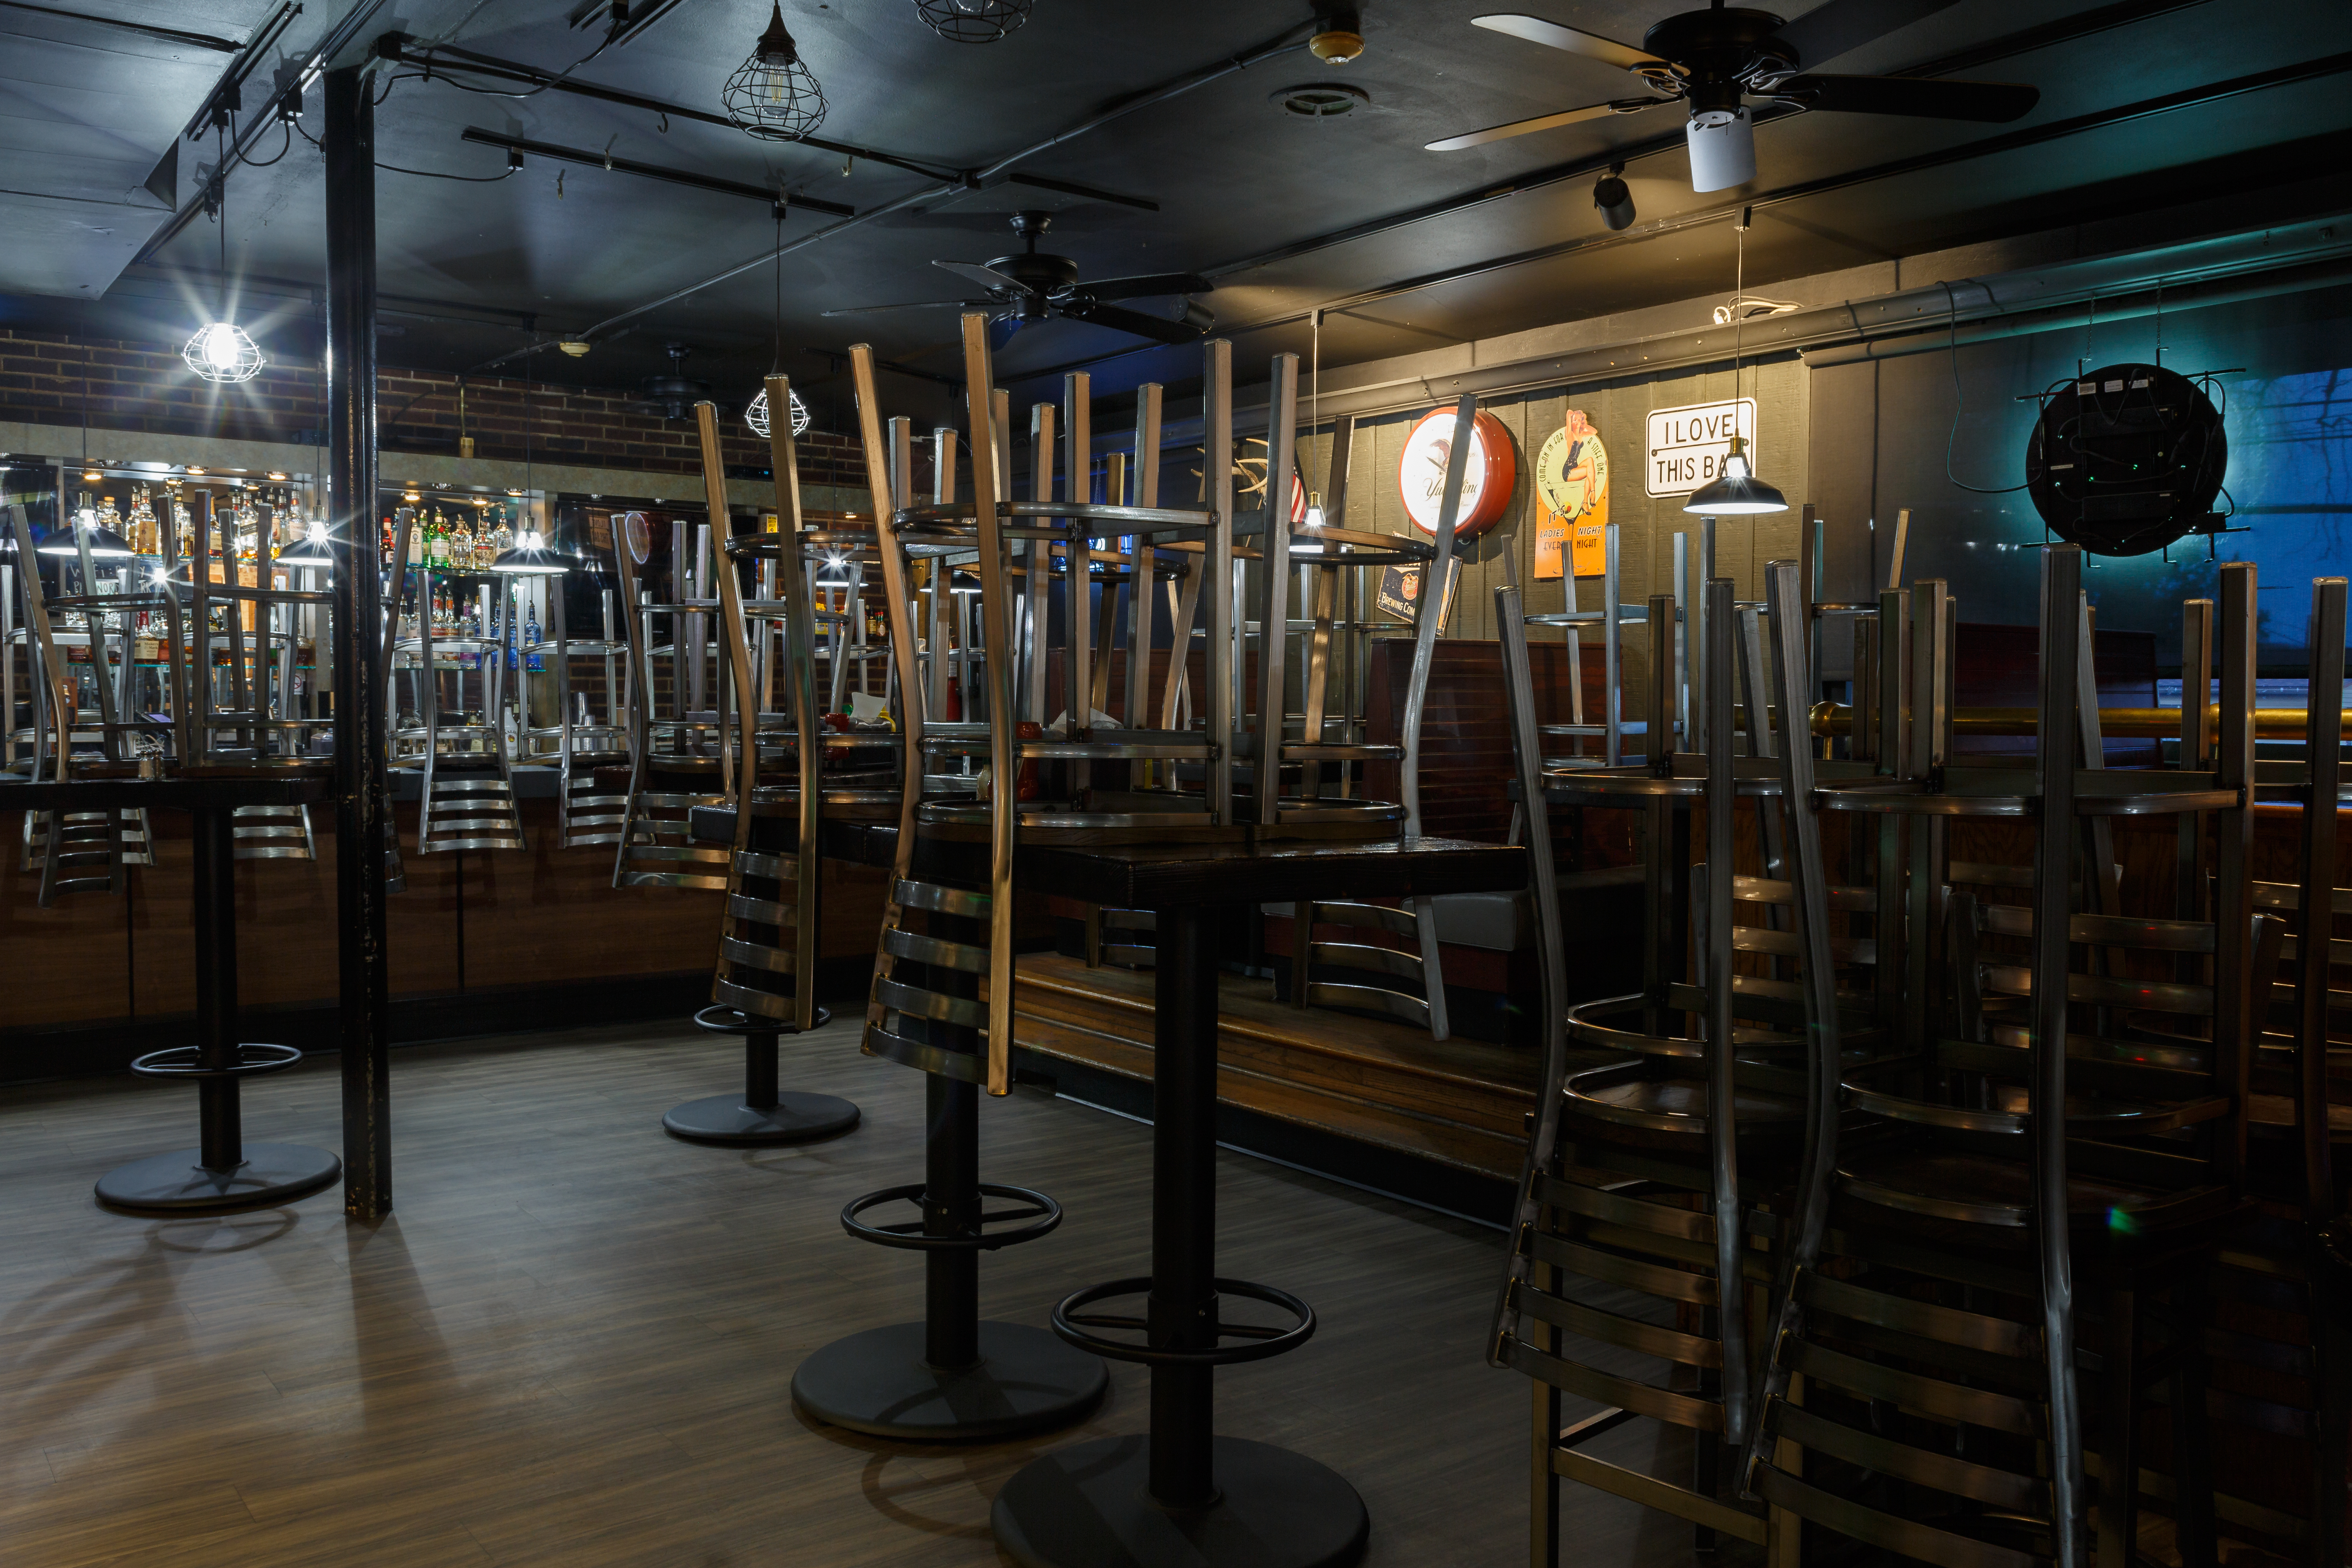 A closed bar is pictured with stools and seats upturned on tables.